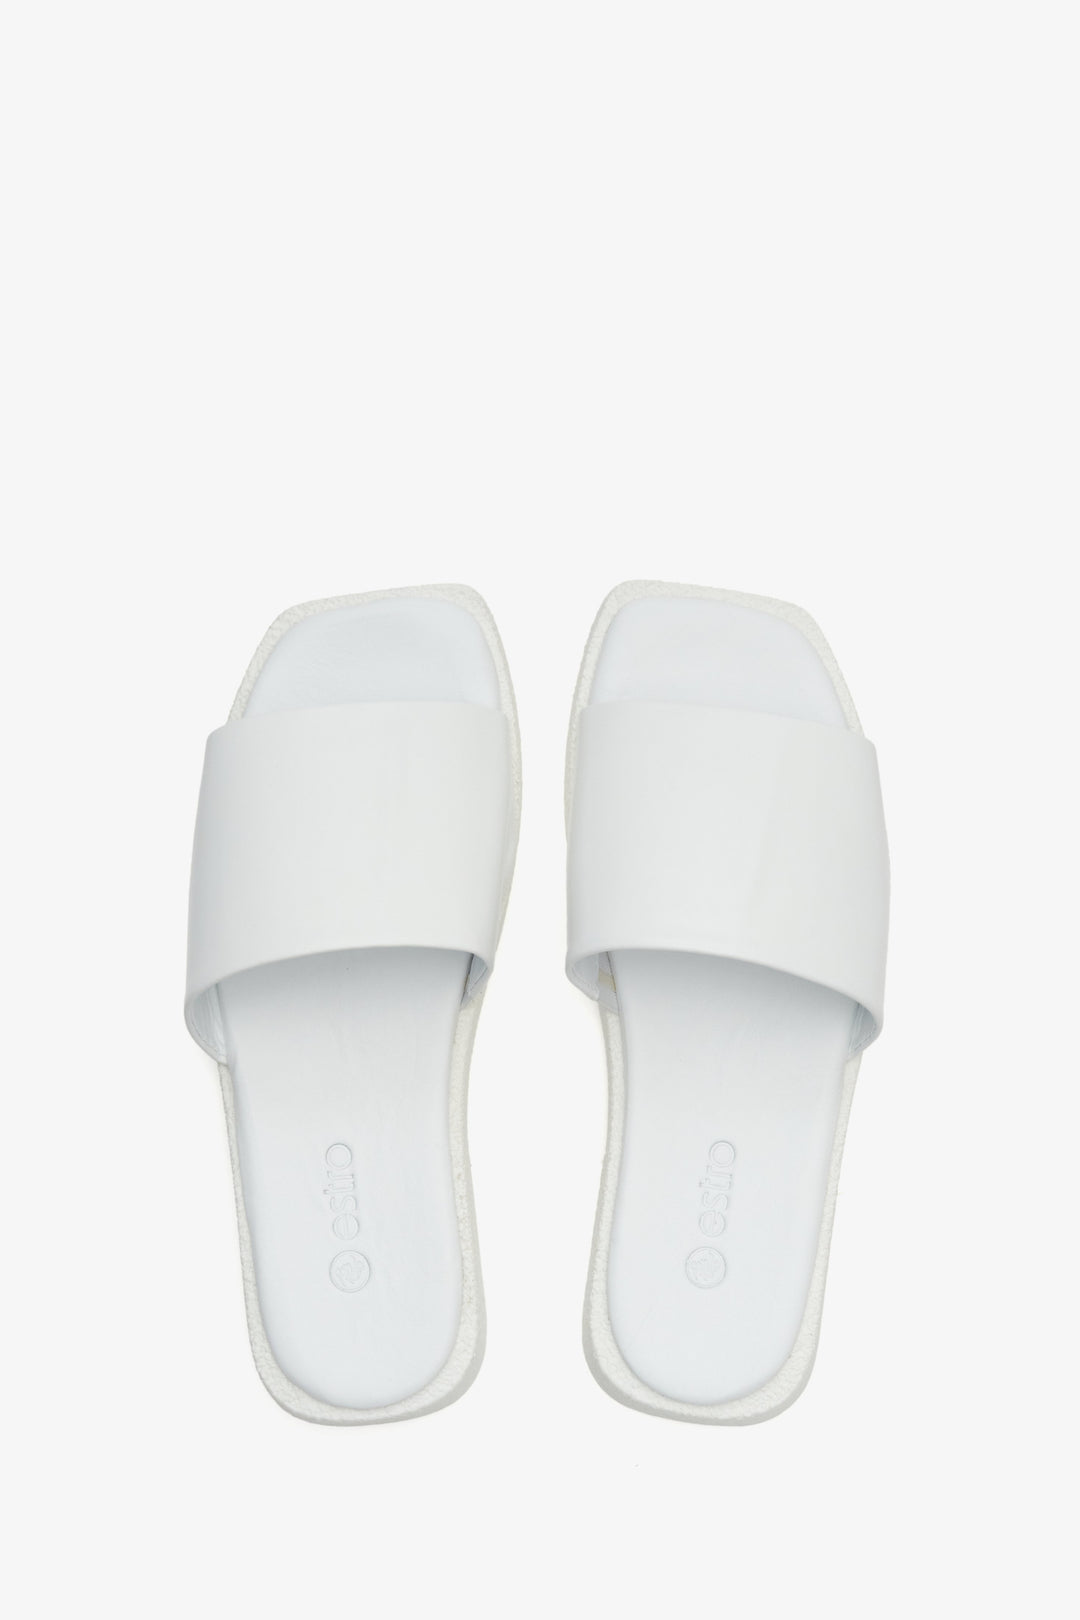 Leather, white Estro women's flat sandals with a square toe - presentation of the model from above.